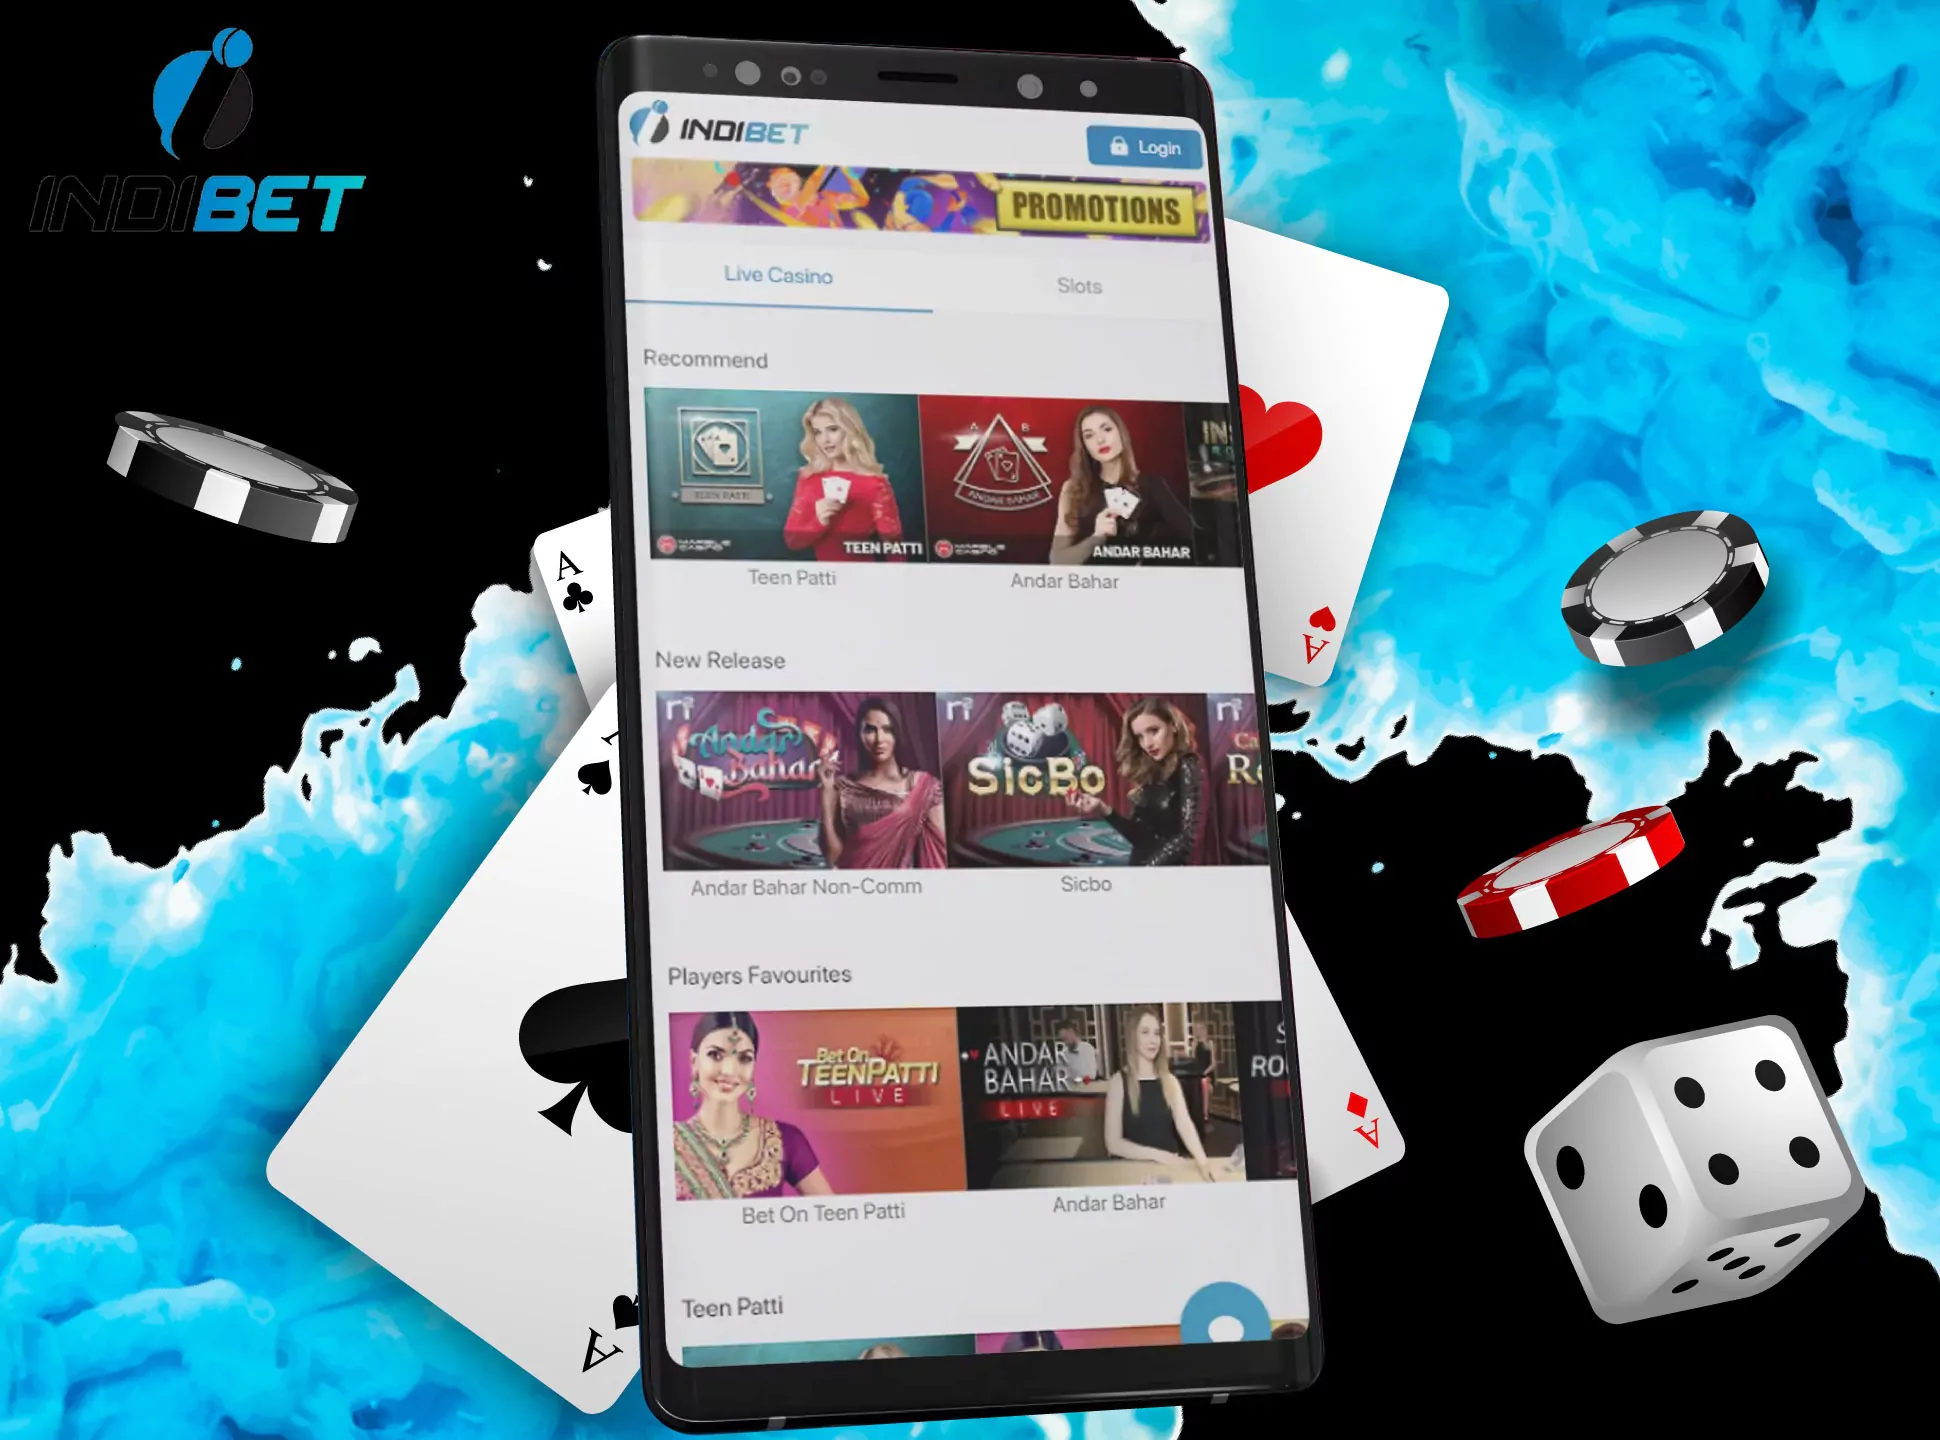 Check for new casino games at Indibet.